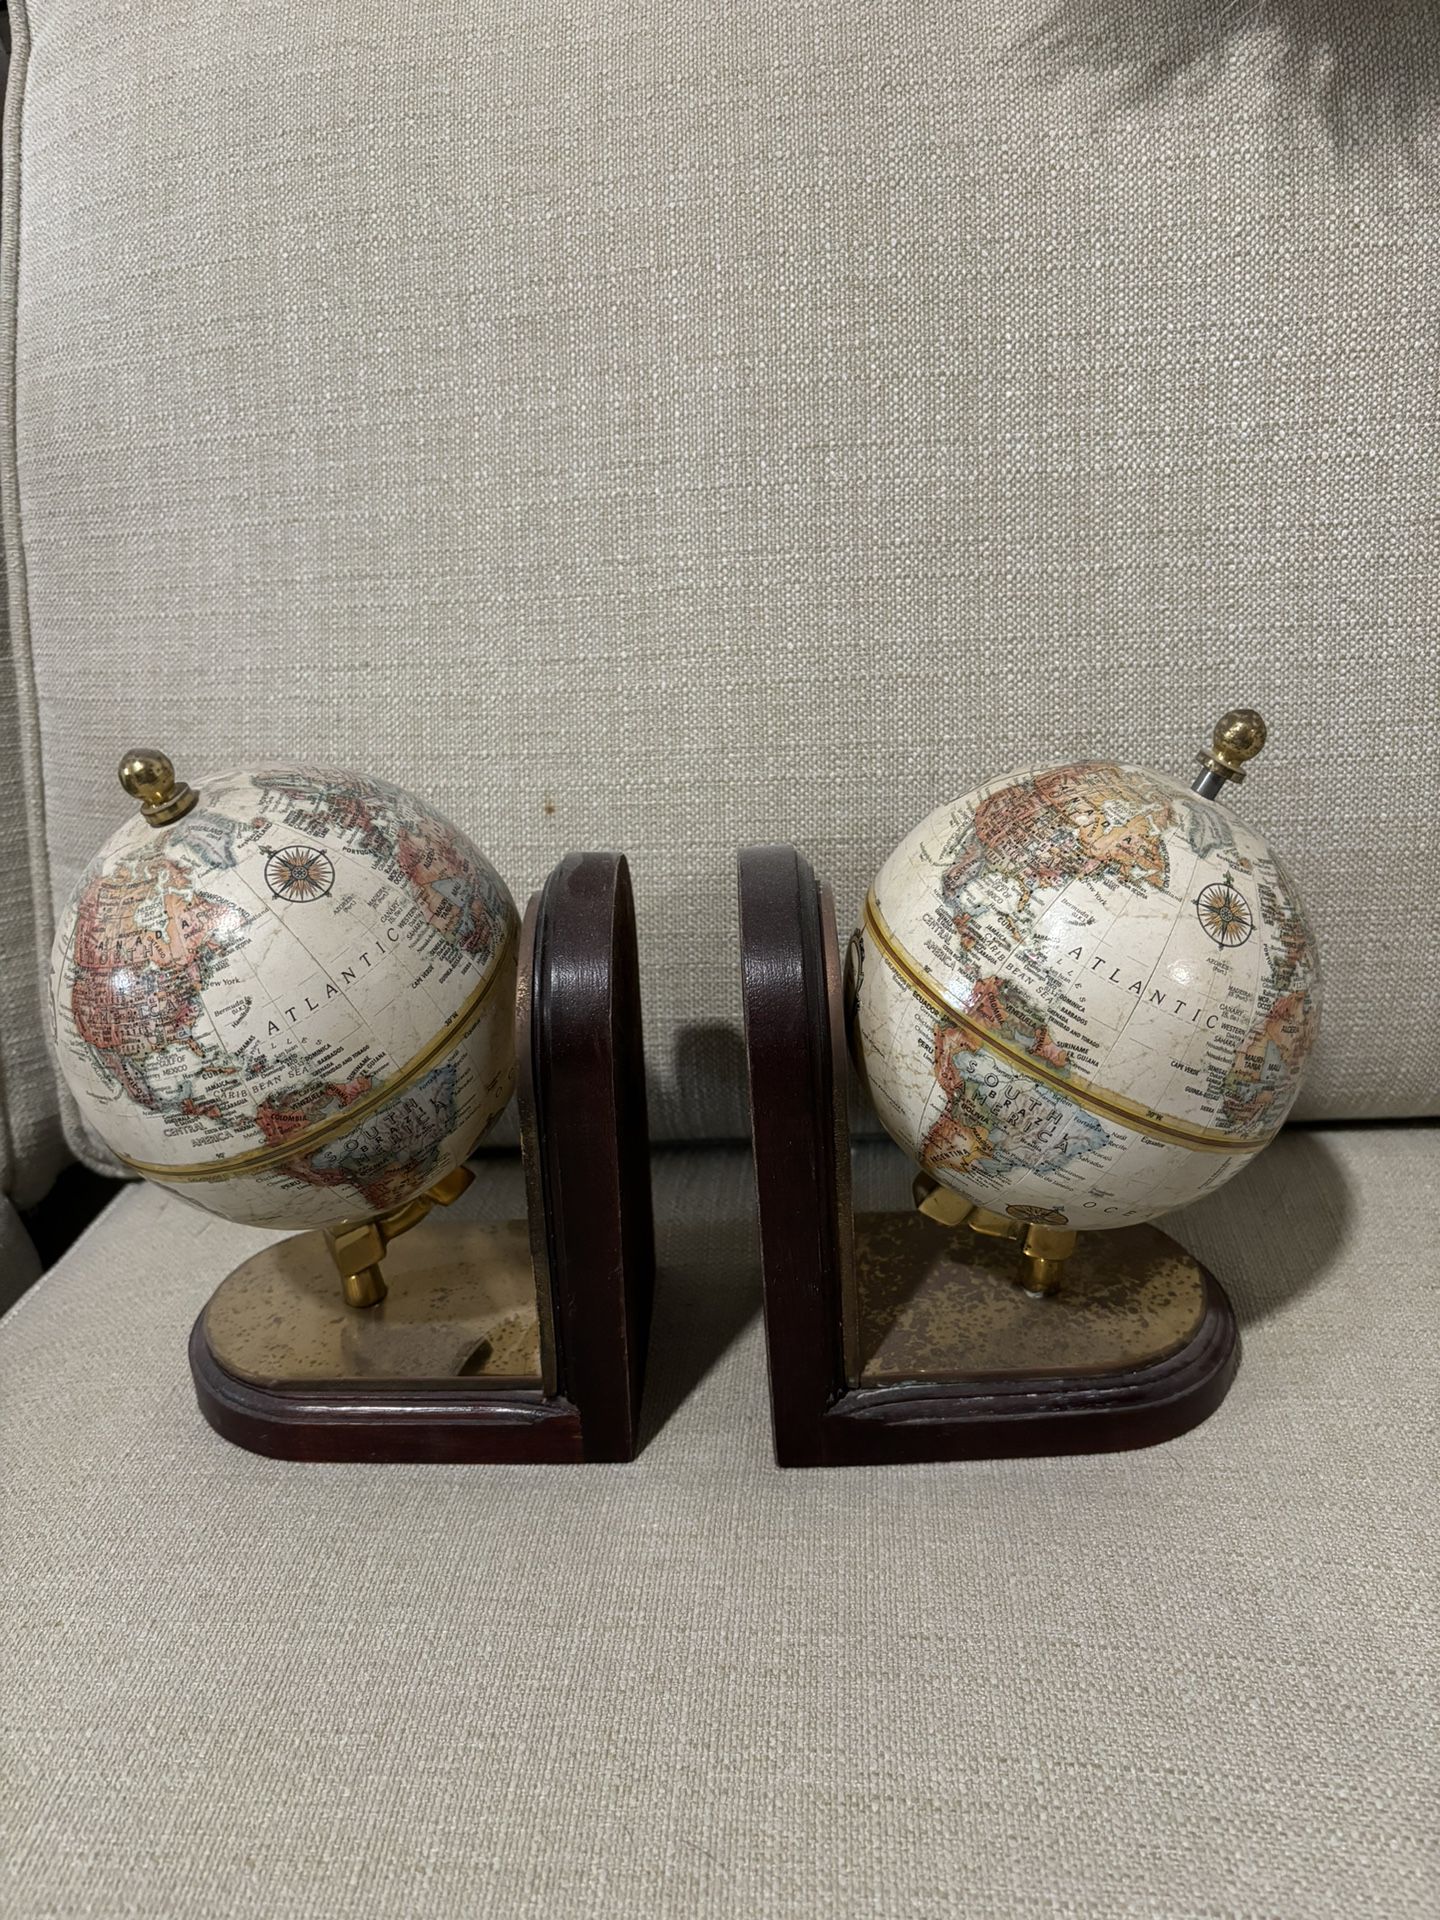  Vintage Replogle Globes Brass And Wood Bookends